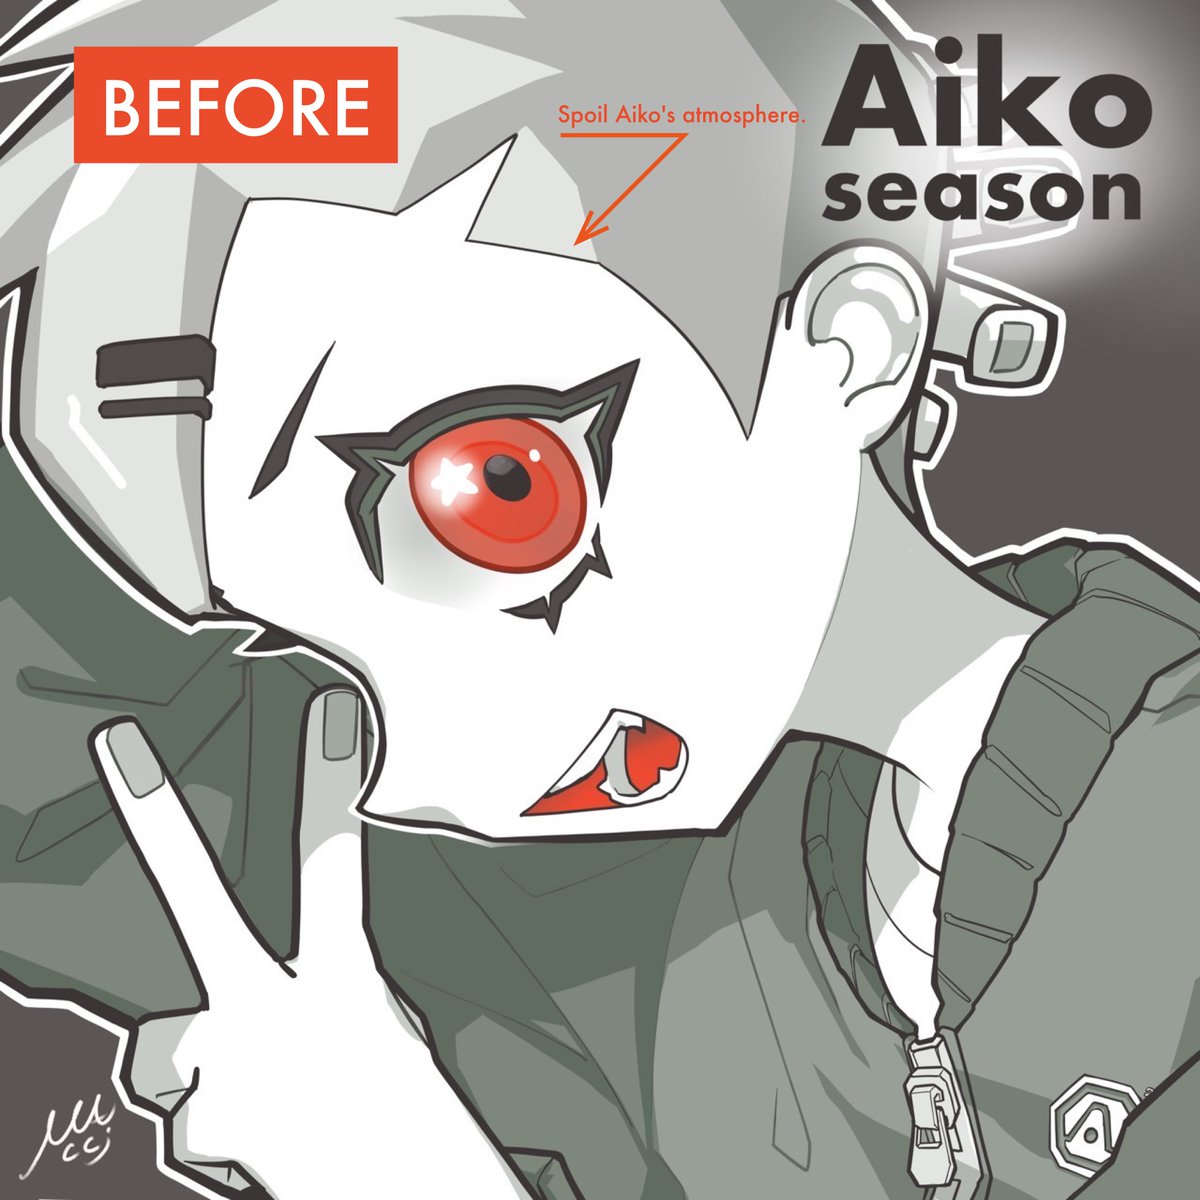 This is my example for drawing Aiko.
One of my realisations.
Whenever I look at @aikovirtual , I see a lot of ingenuity and kindness towards the viewer.
Every time I draw, I fall in love with Aiko.

#aikoseason